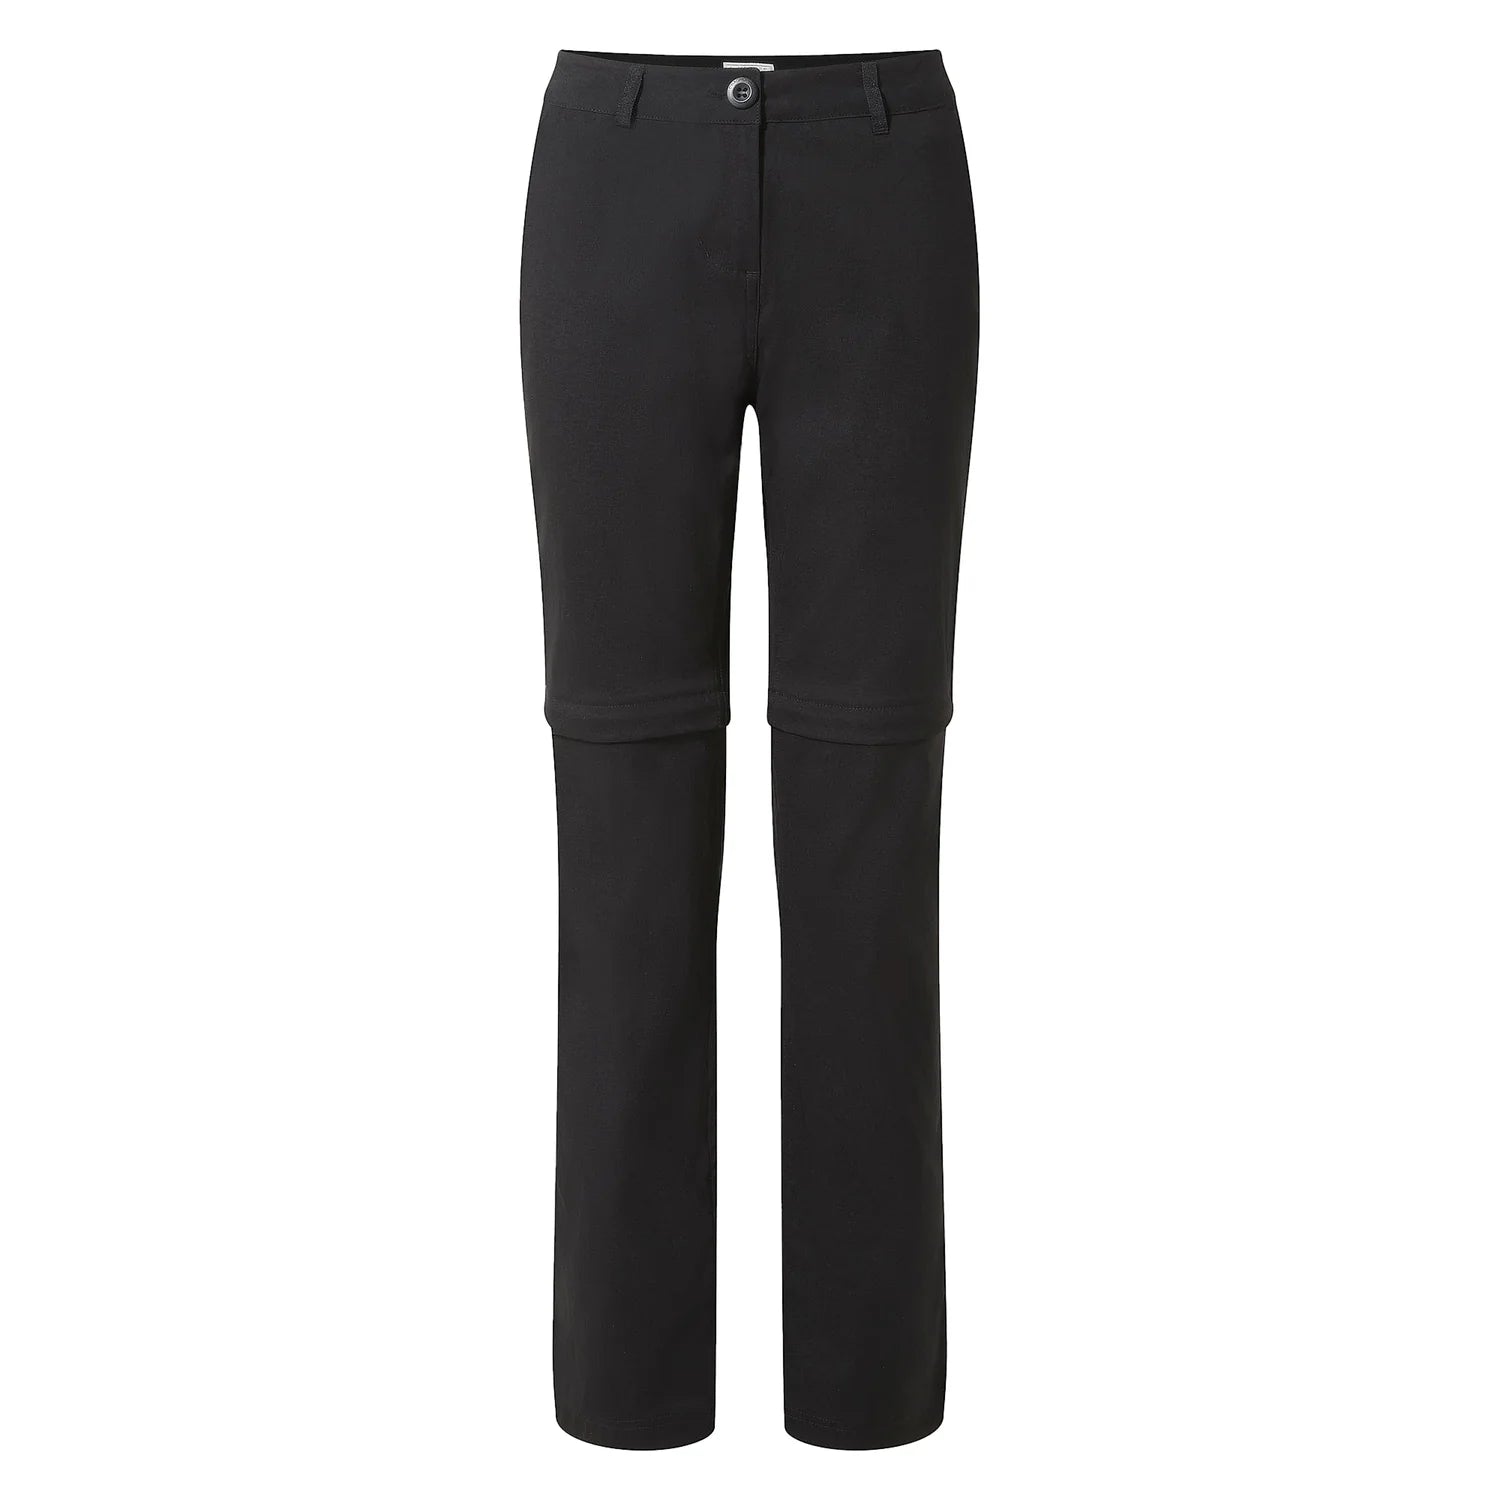 Craghoppers Trousers: Where Comfort Meets Adventure